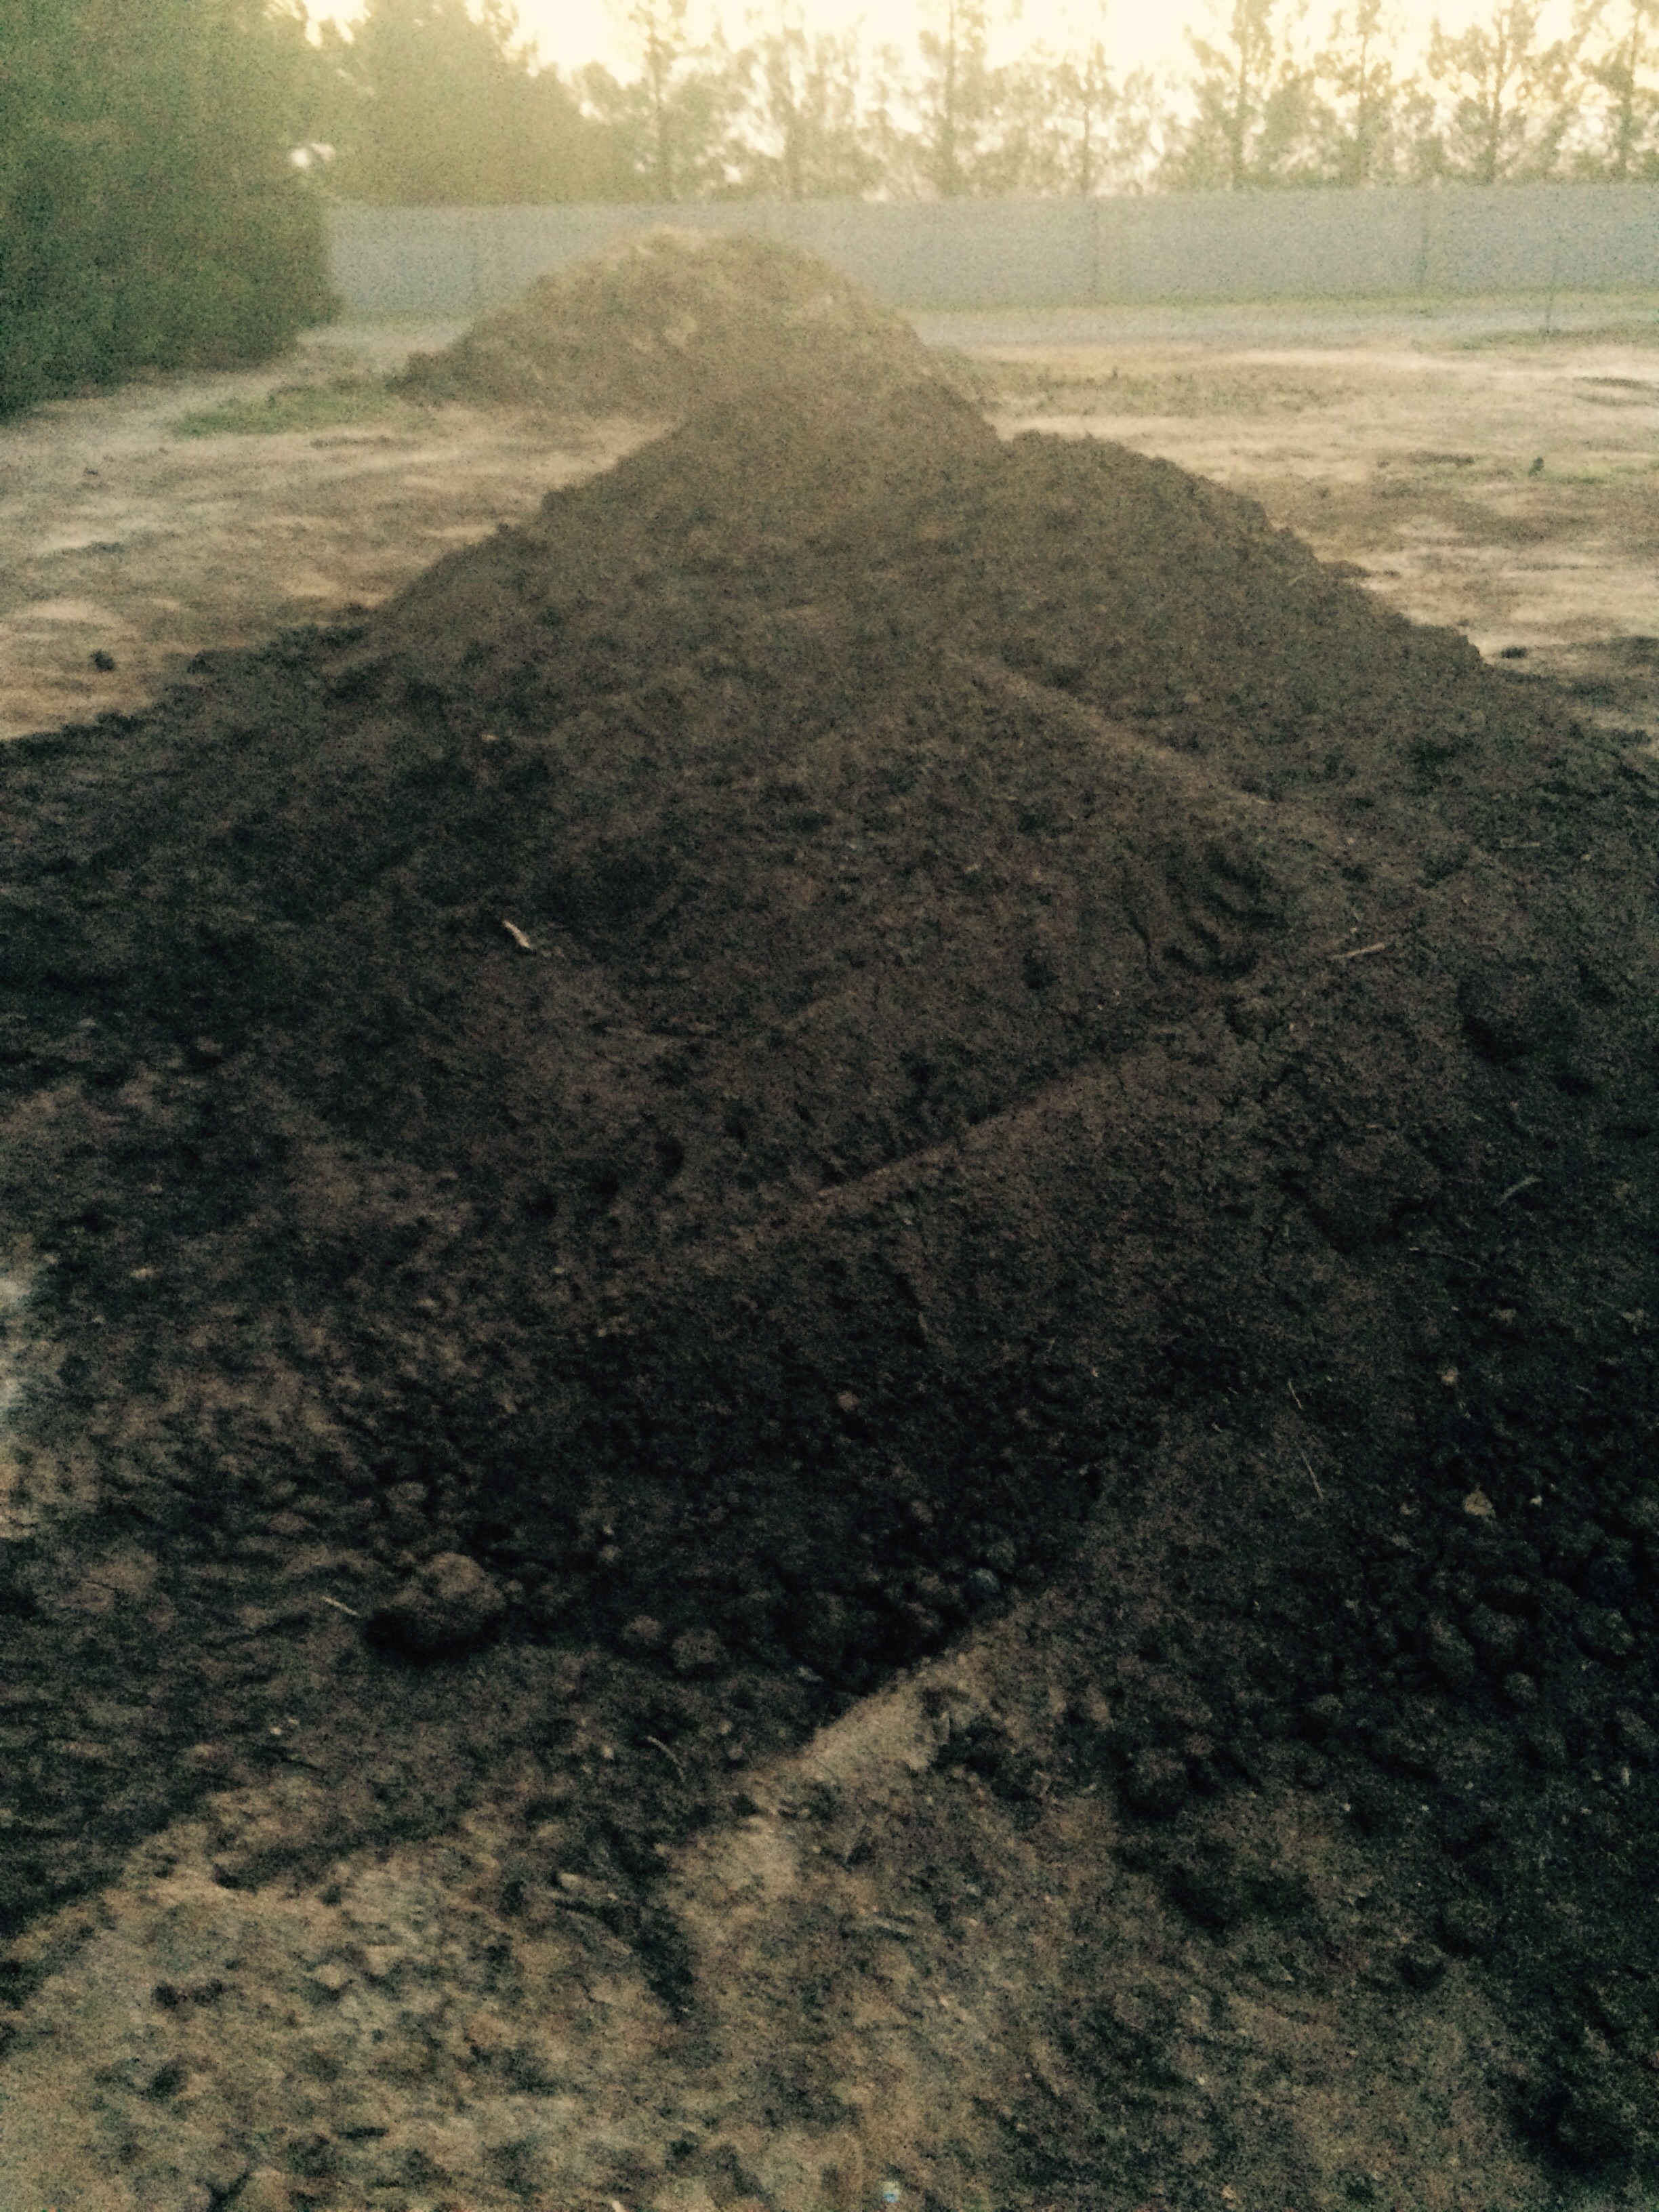 We make our own compost this years is really good by our carful attention and bio dynamic practices 